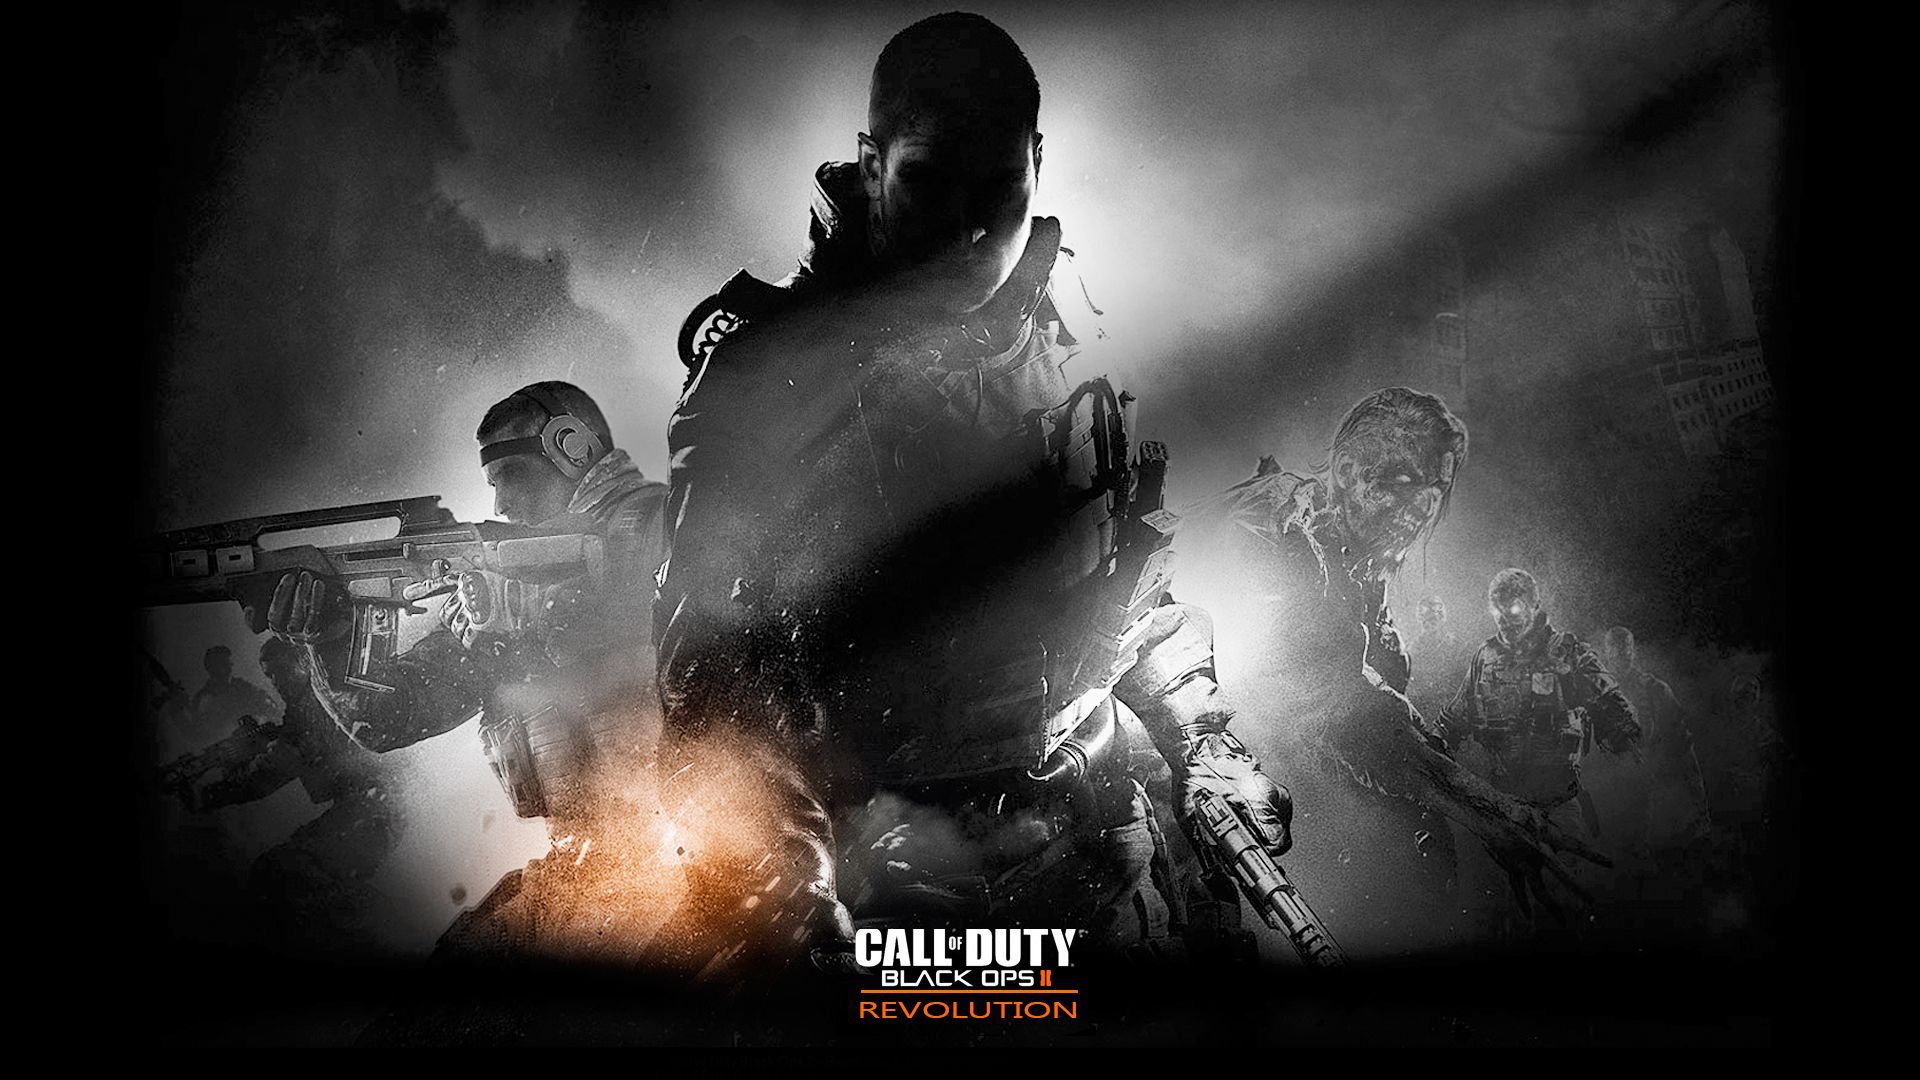 Call Of Duty Black Ops 2 Revolution Wallpapers HD Backgrounds